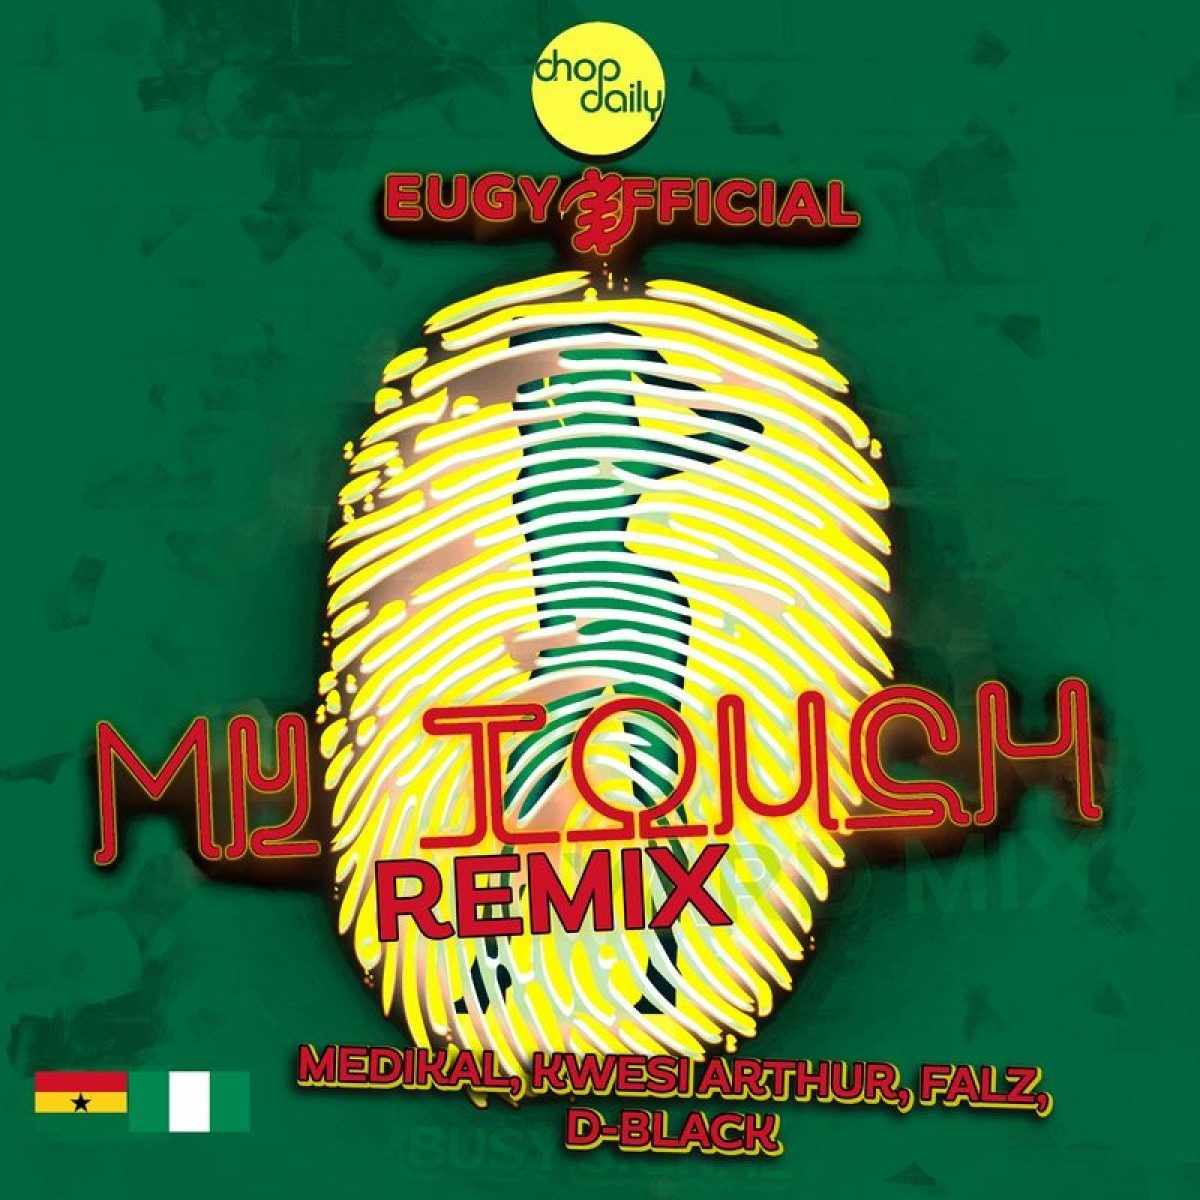 Eugy, Chop Daily My Touch (remix)